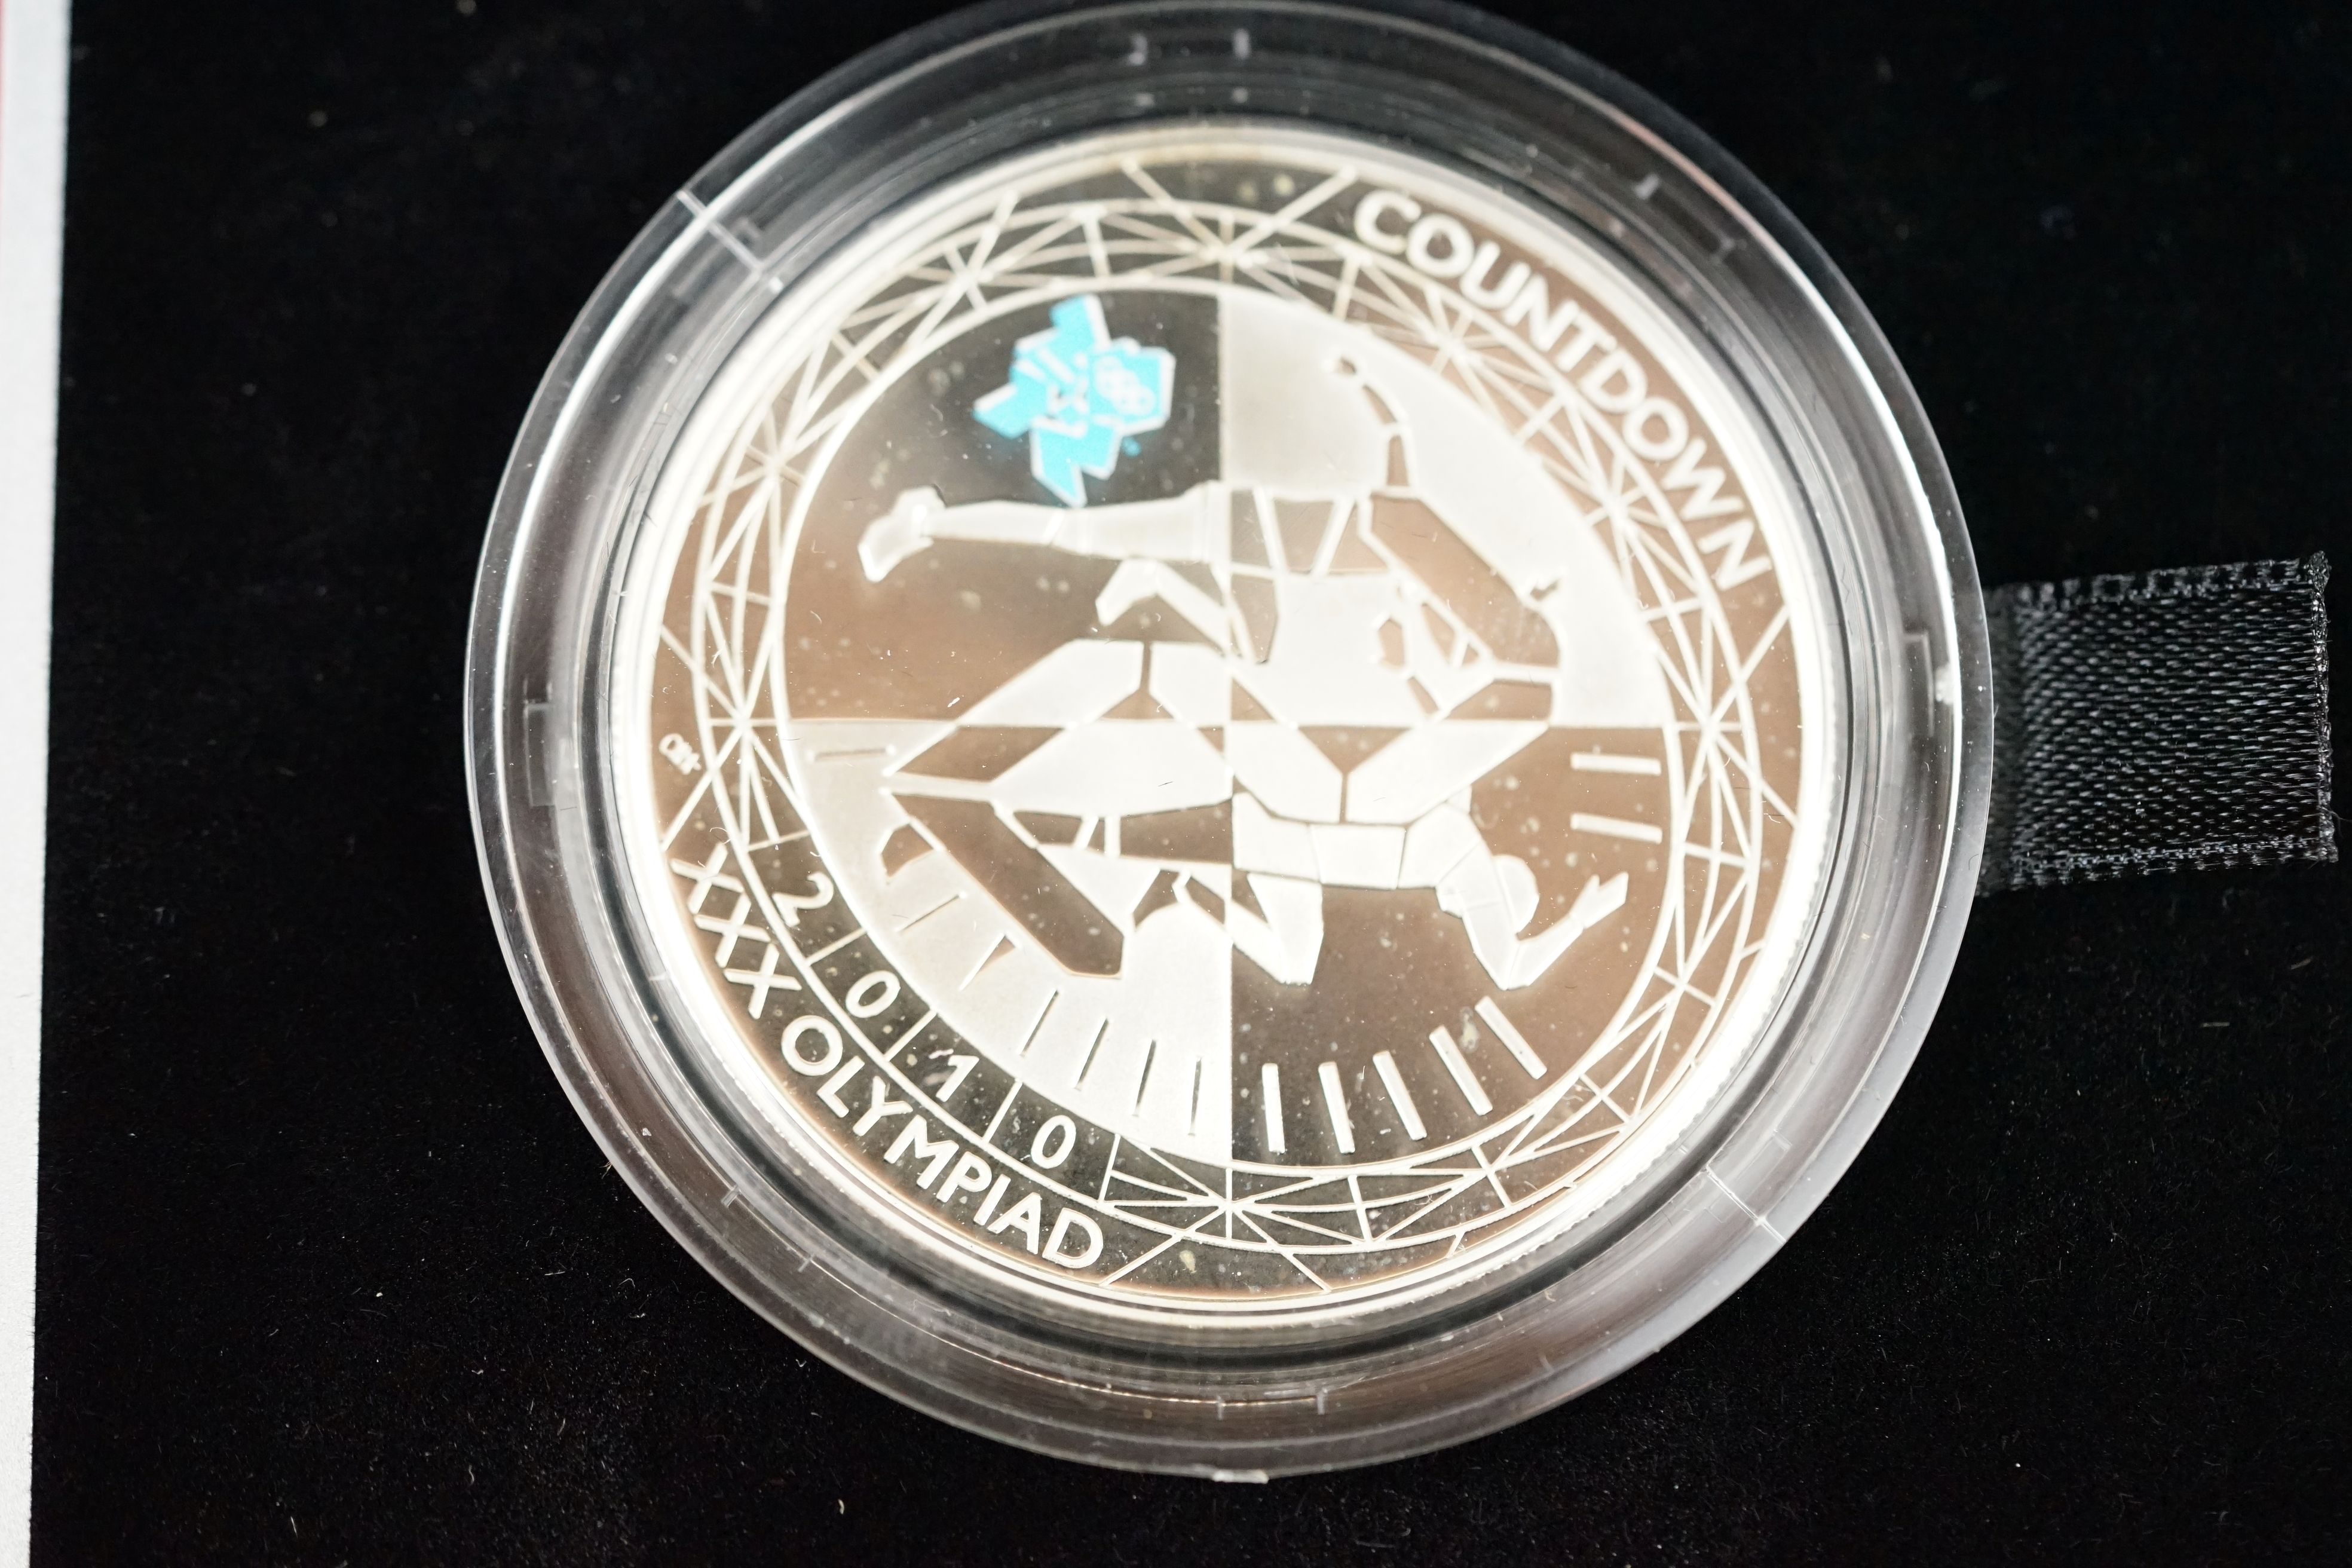 The Royal Mint Countdown to London 2012 2010 silver proof £5 coin complete with display box and COA. - Image 2 of 2